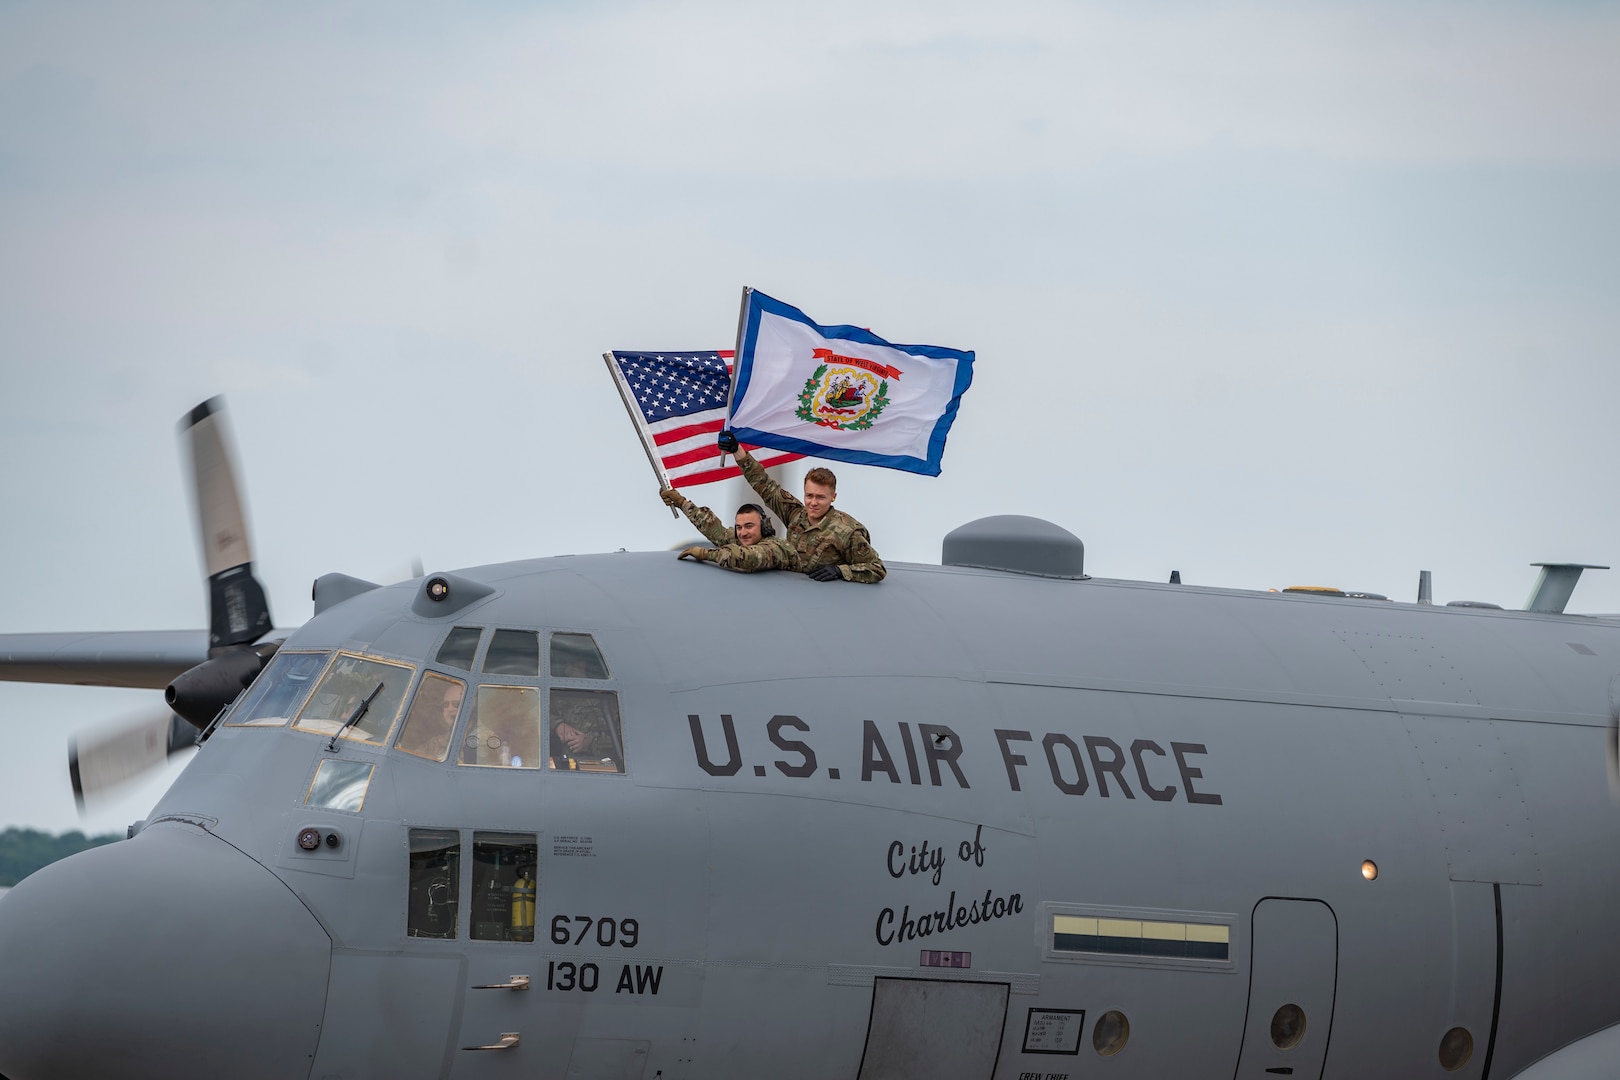 Airmen wave the United States and State of West Virginia Flags as they taxi onto the apron after returning from deployment on July 16, 2020 at McLaughlin Air National Guard Base, Charleston, W.Va. Approximately 50 Airmen returned in a two day span from Kuwait, where they provided support for C-130H operations in the Middle East Area of Responsibility. (U.S. Air National Guard Photo by Staff Sgt. Caleb Vance)